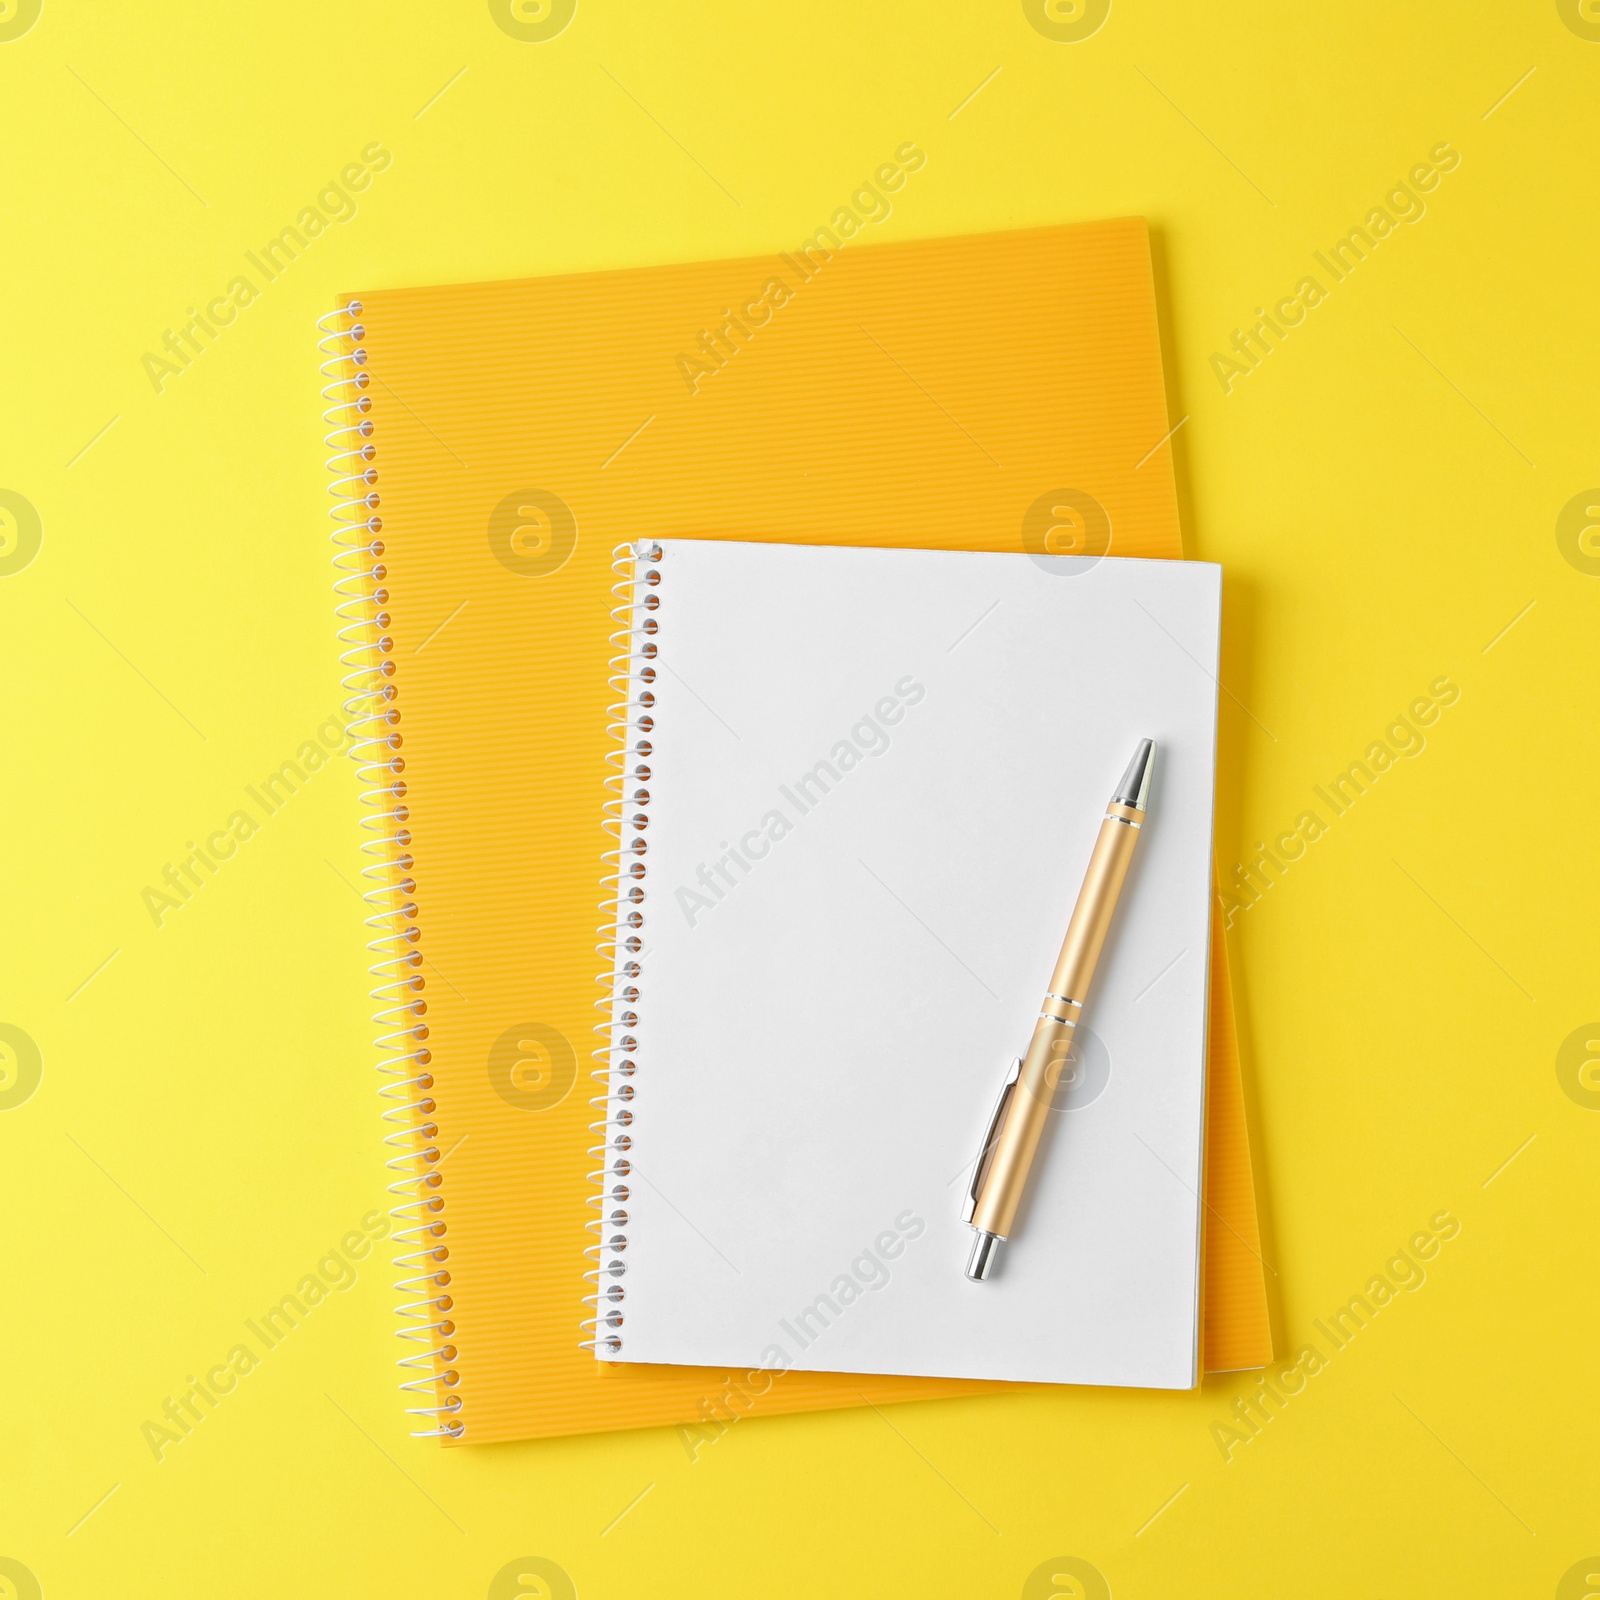 Image of Notebooks and pen on yellow background, top view